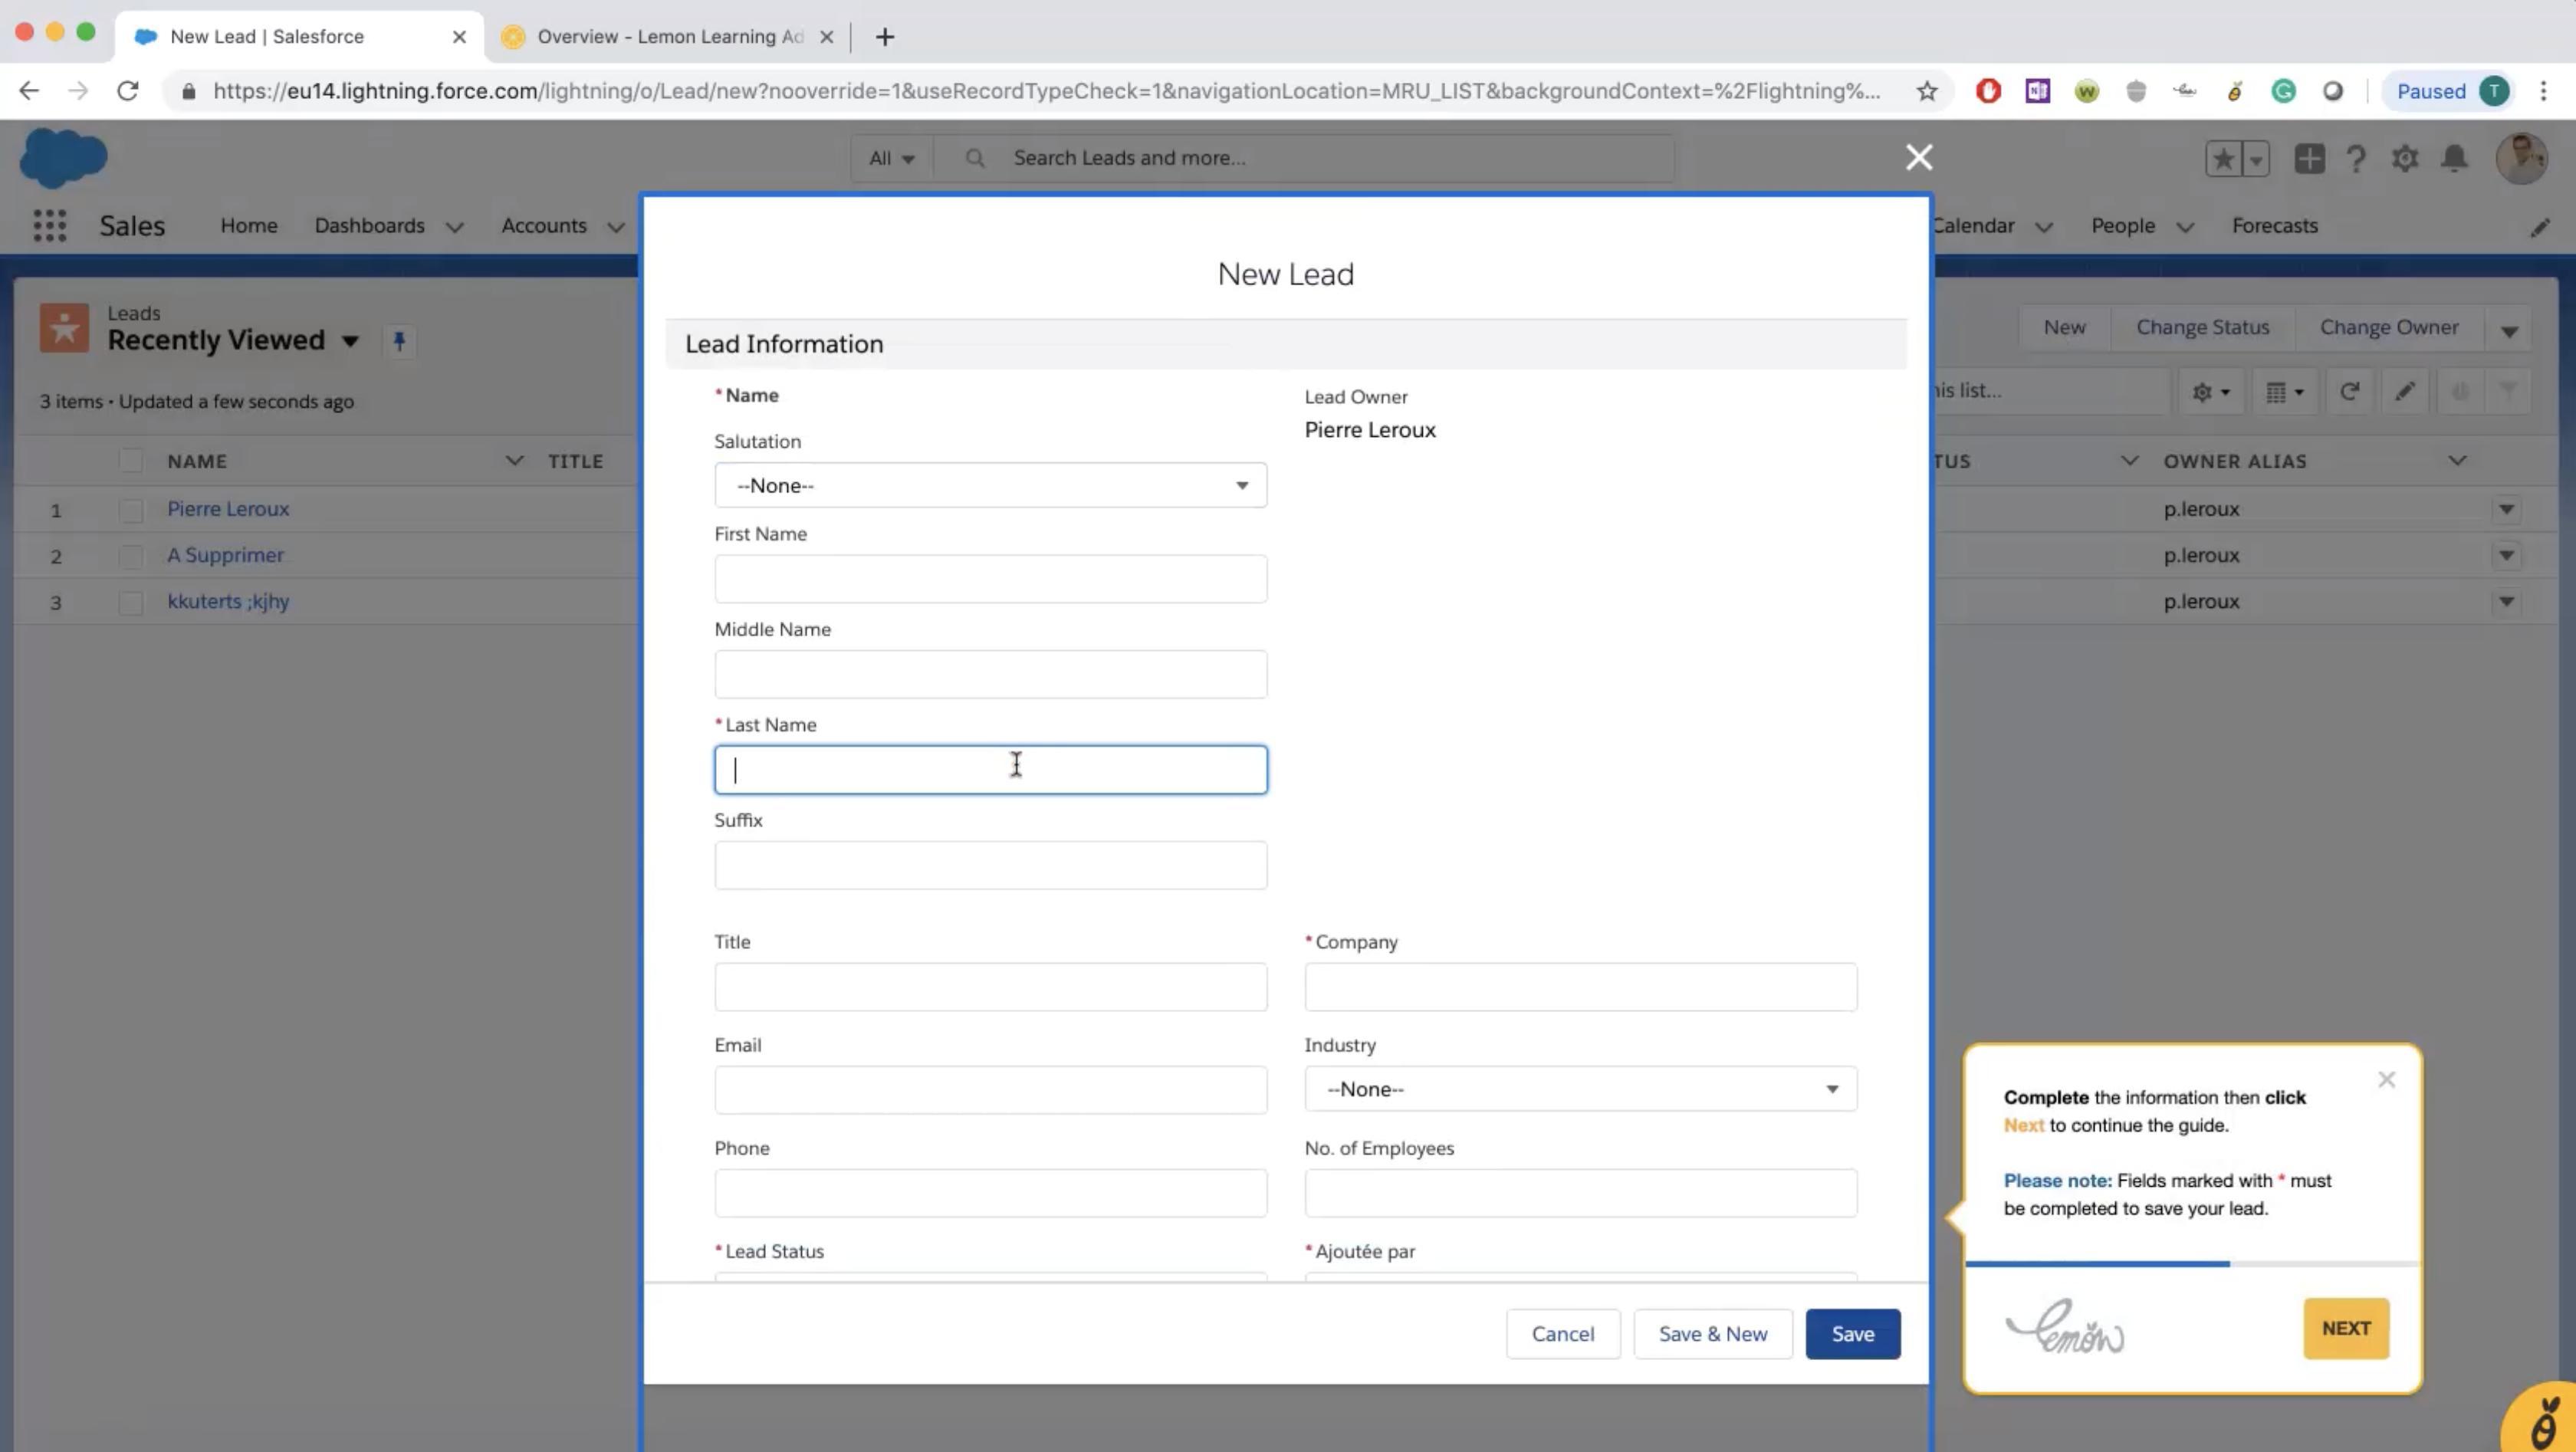 Interactive navigation assistance directly in the tool (here, Salesforce)